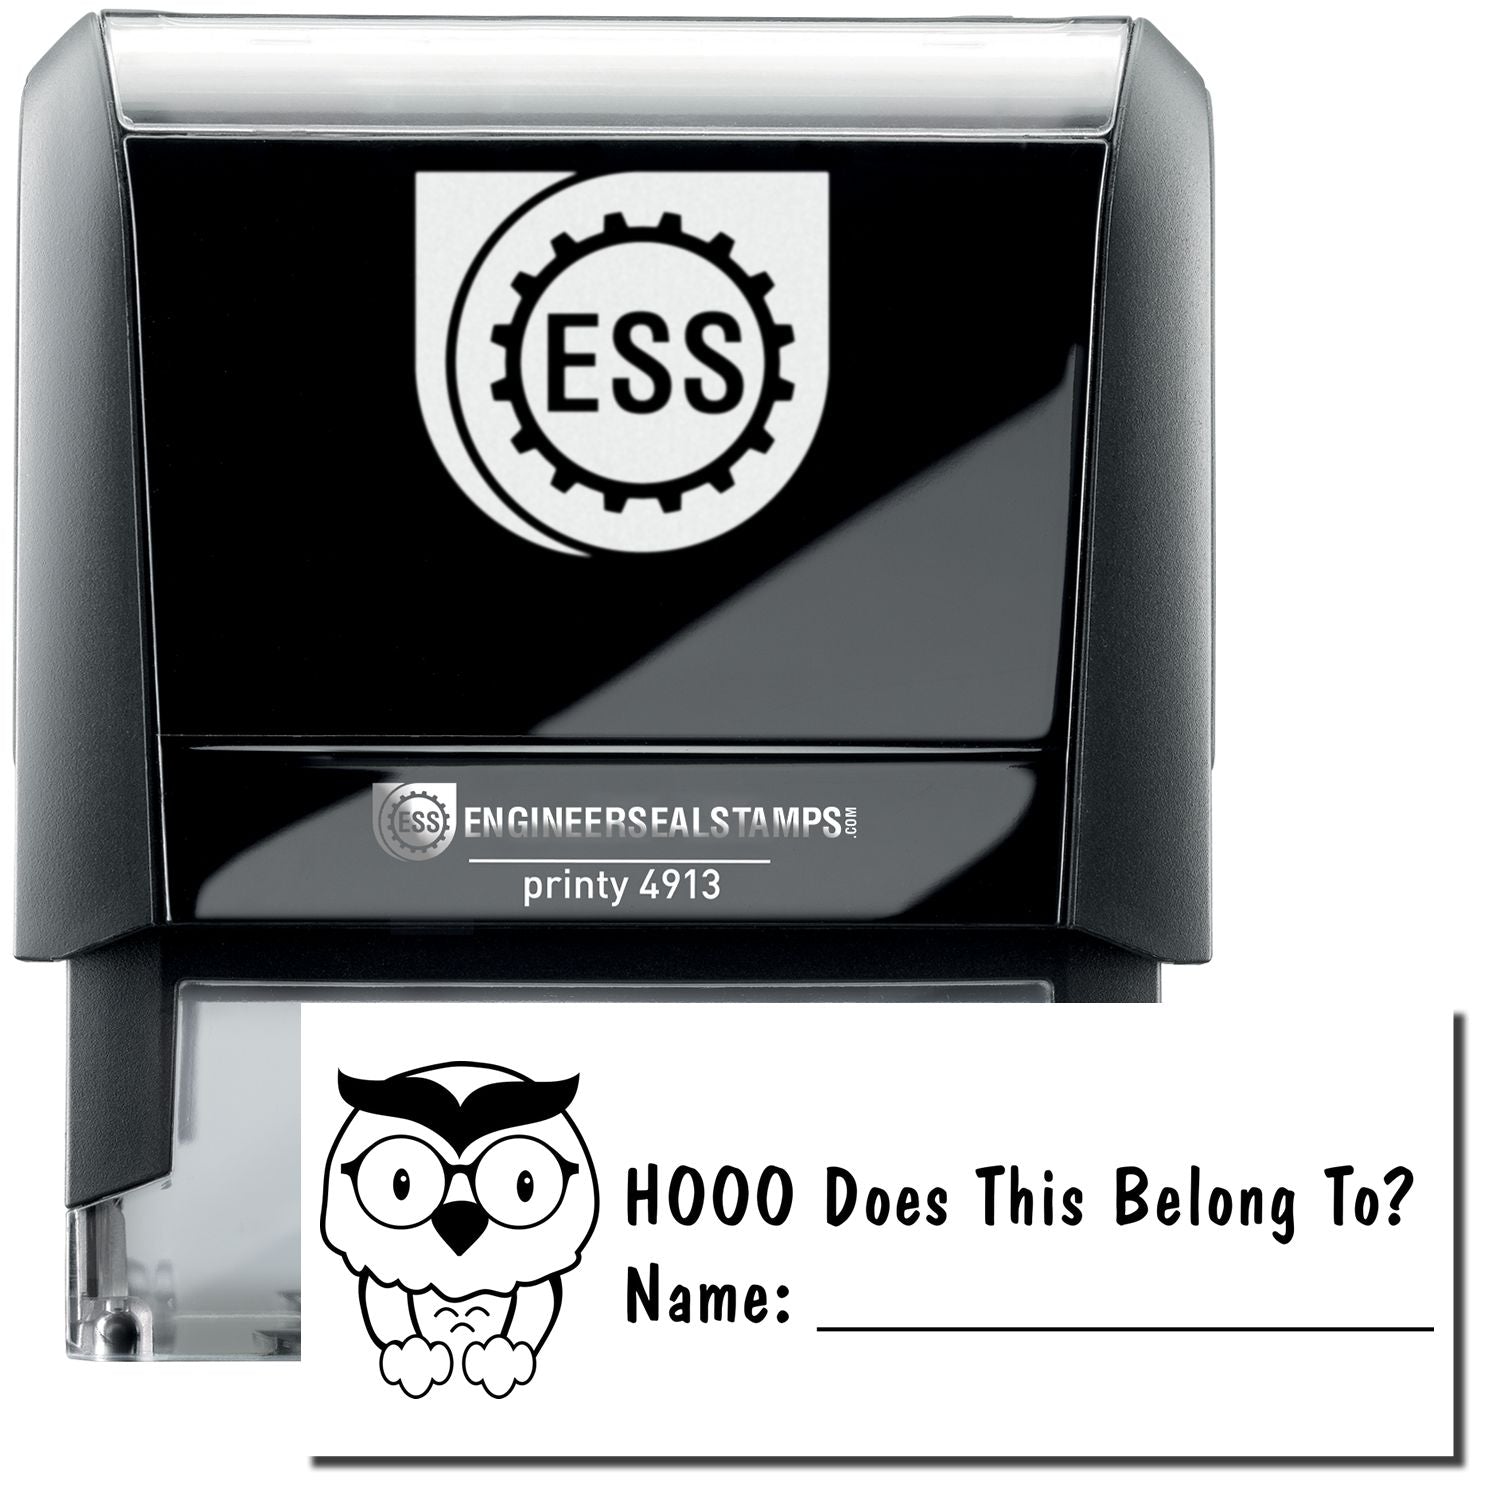 A self-inking stamp with a stamped image showing how the text "HOOO Does This Belong To?" with an image of an owl on the left, and has a second line that reads "Name:" (and leaves a space with it) in a large font is displayed after stamping.